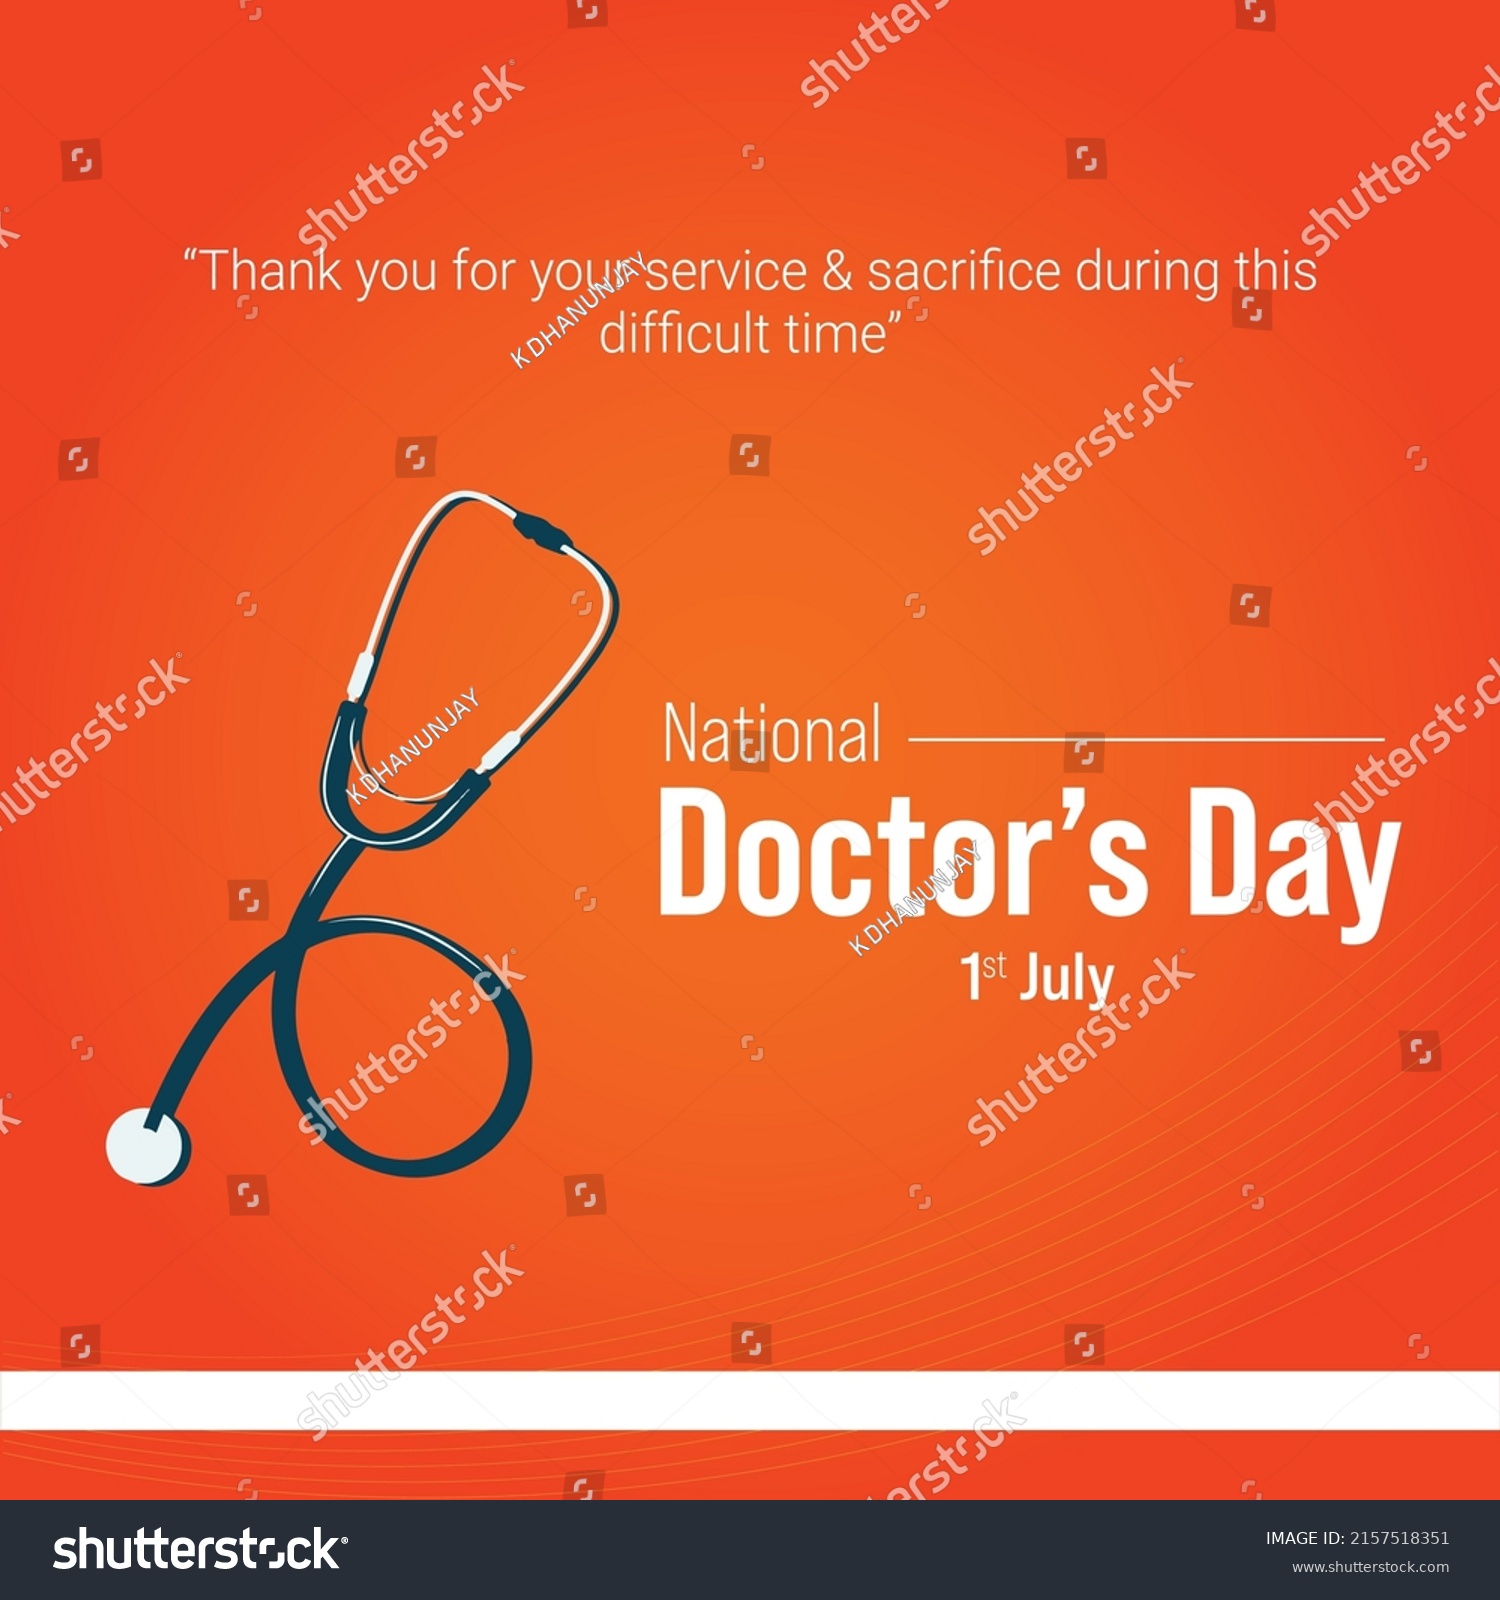 National Doctors Day Illustration Banner Stock Vector (Royalty Free